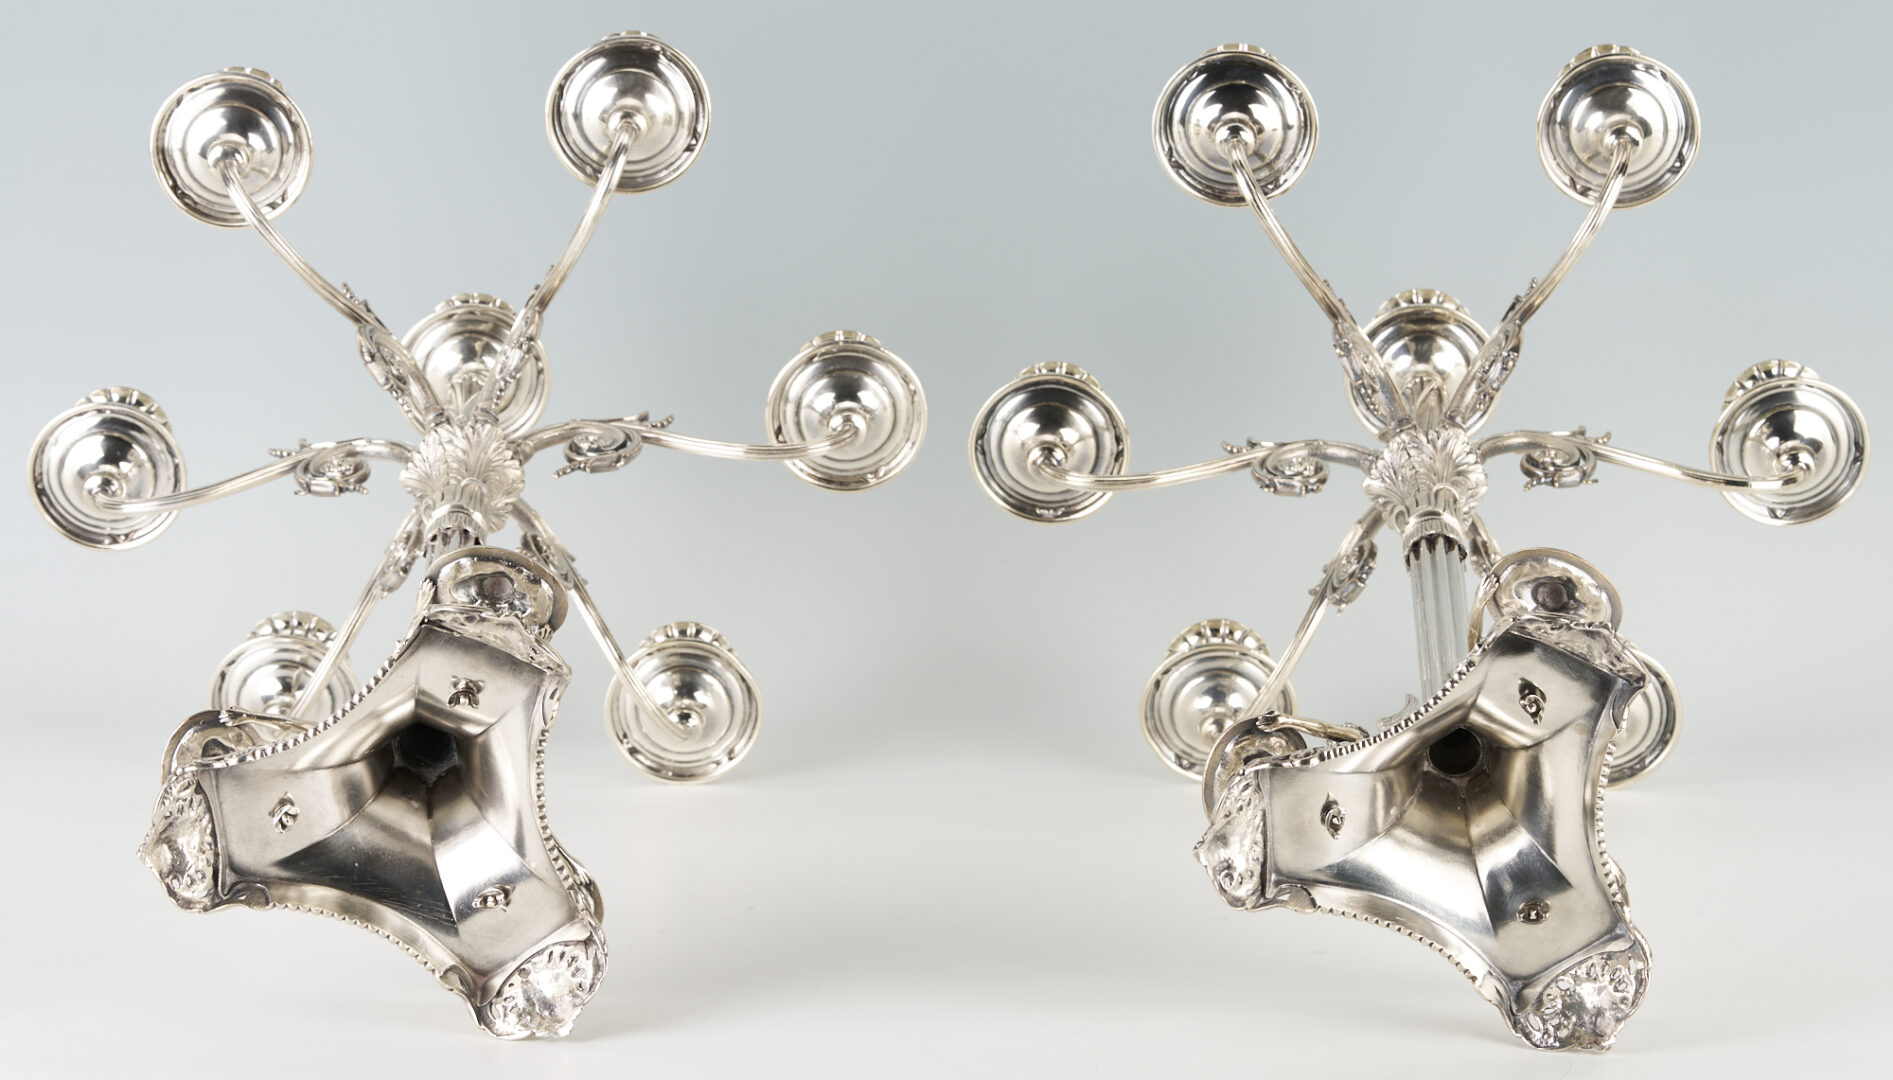 Lot 299: Pair of 7-Light Figural Silverplated Candelabra